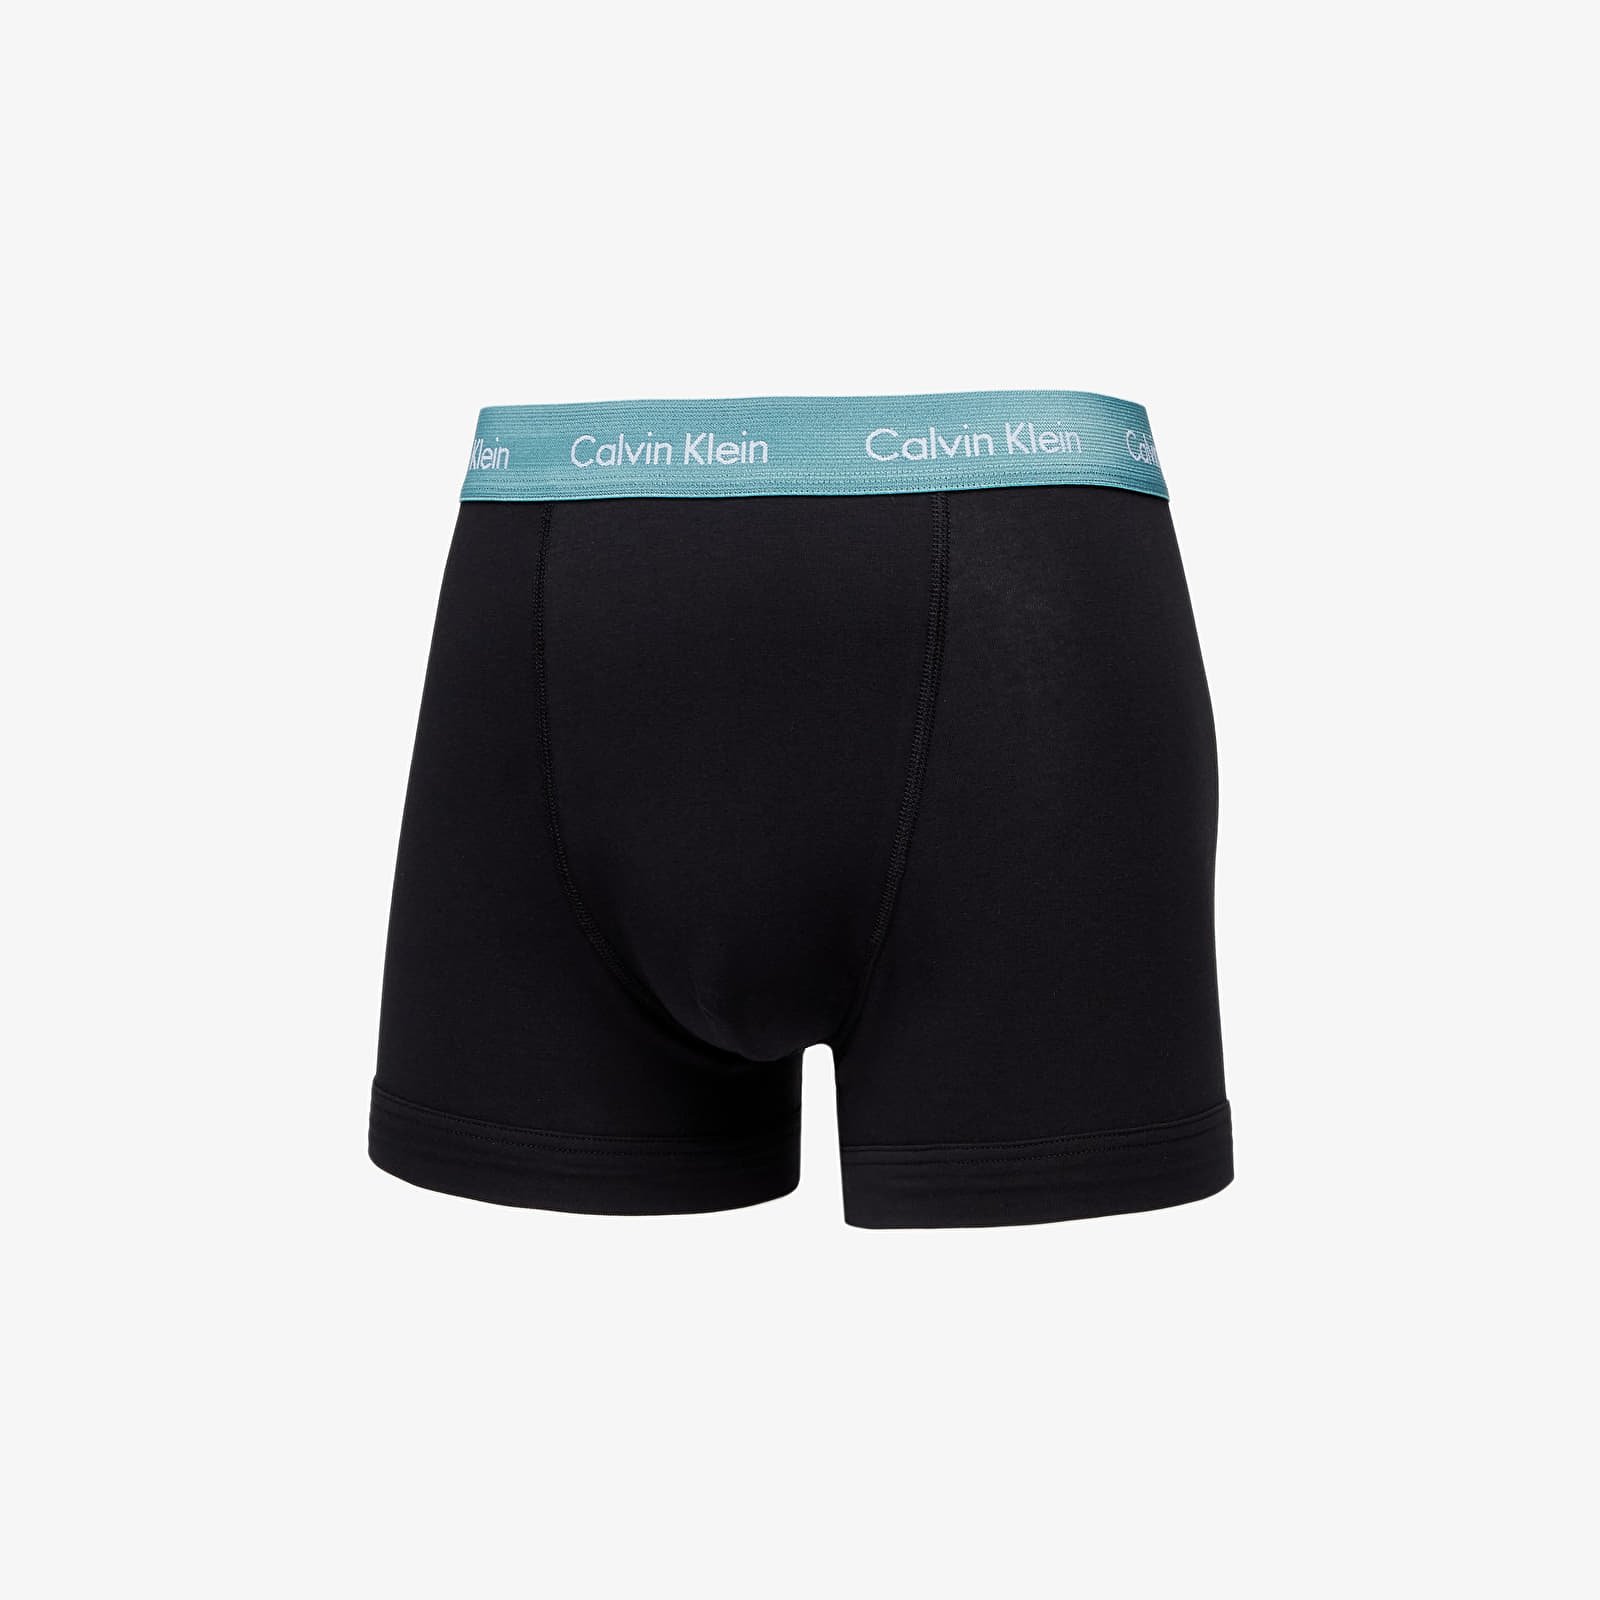 Cotton Stretch Classic Fit Trunks 3-Pack